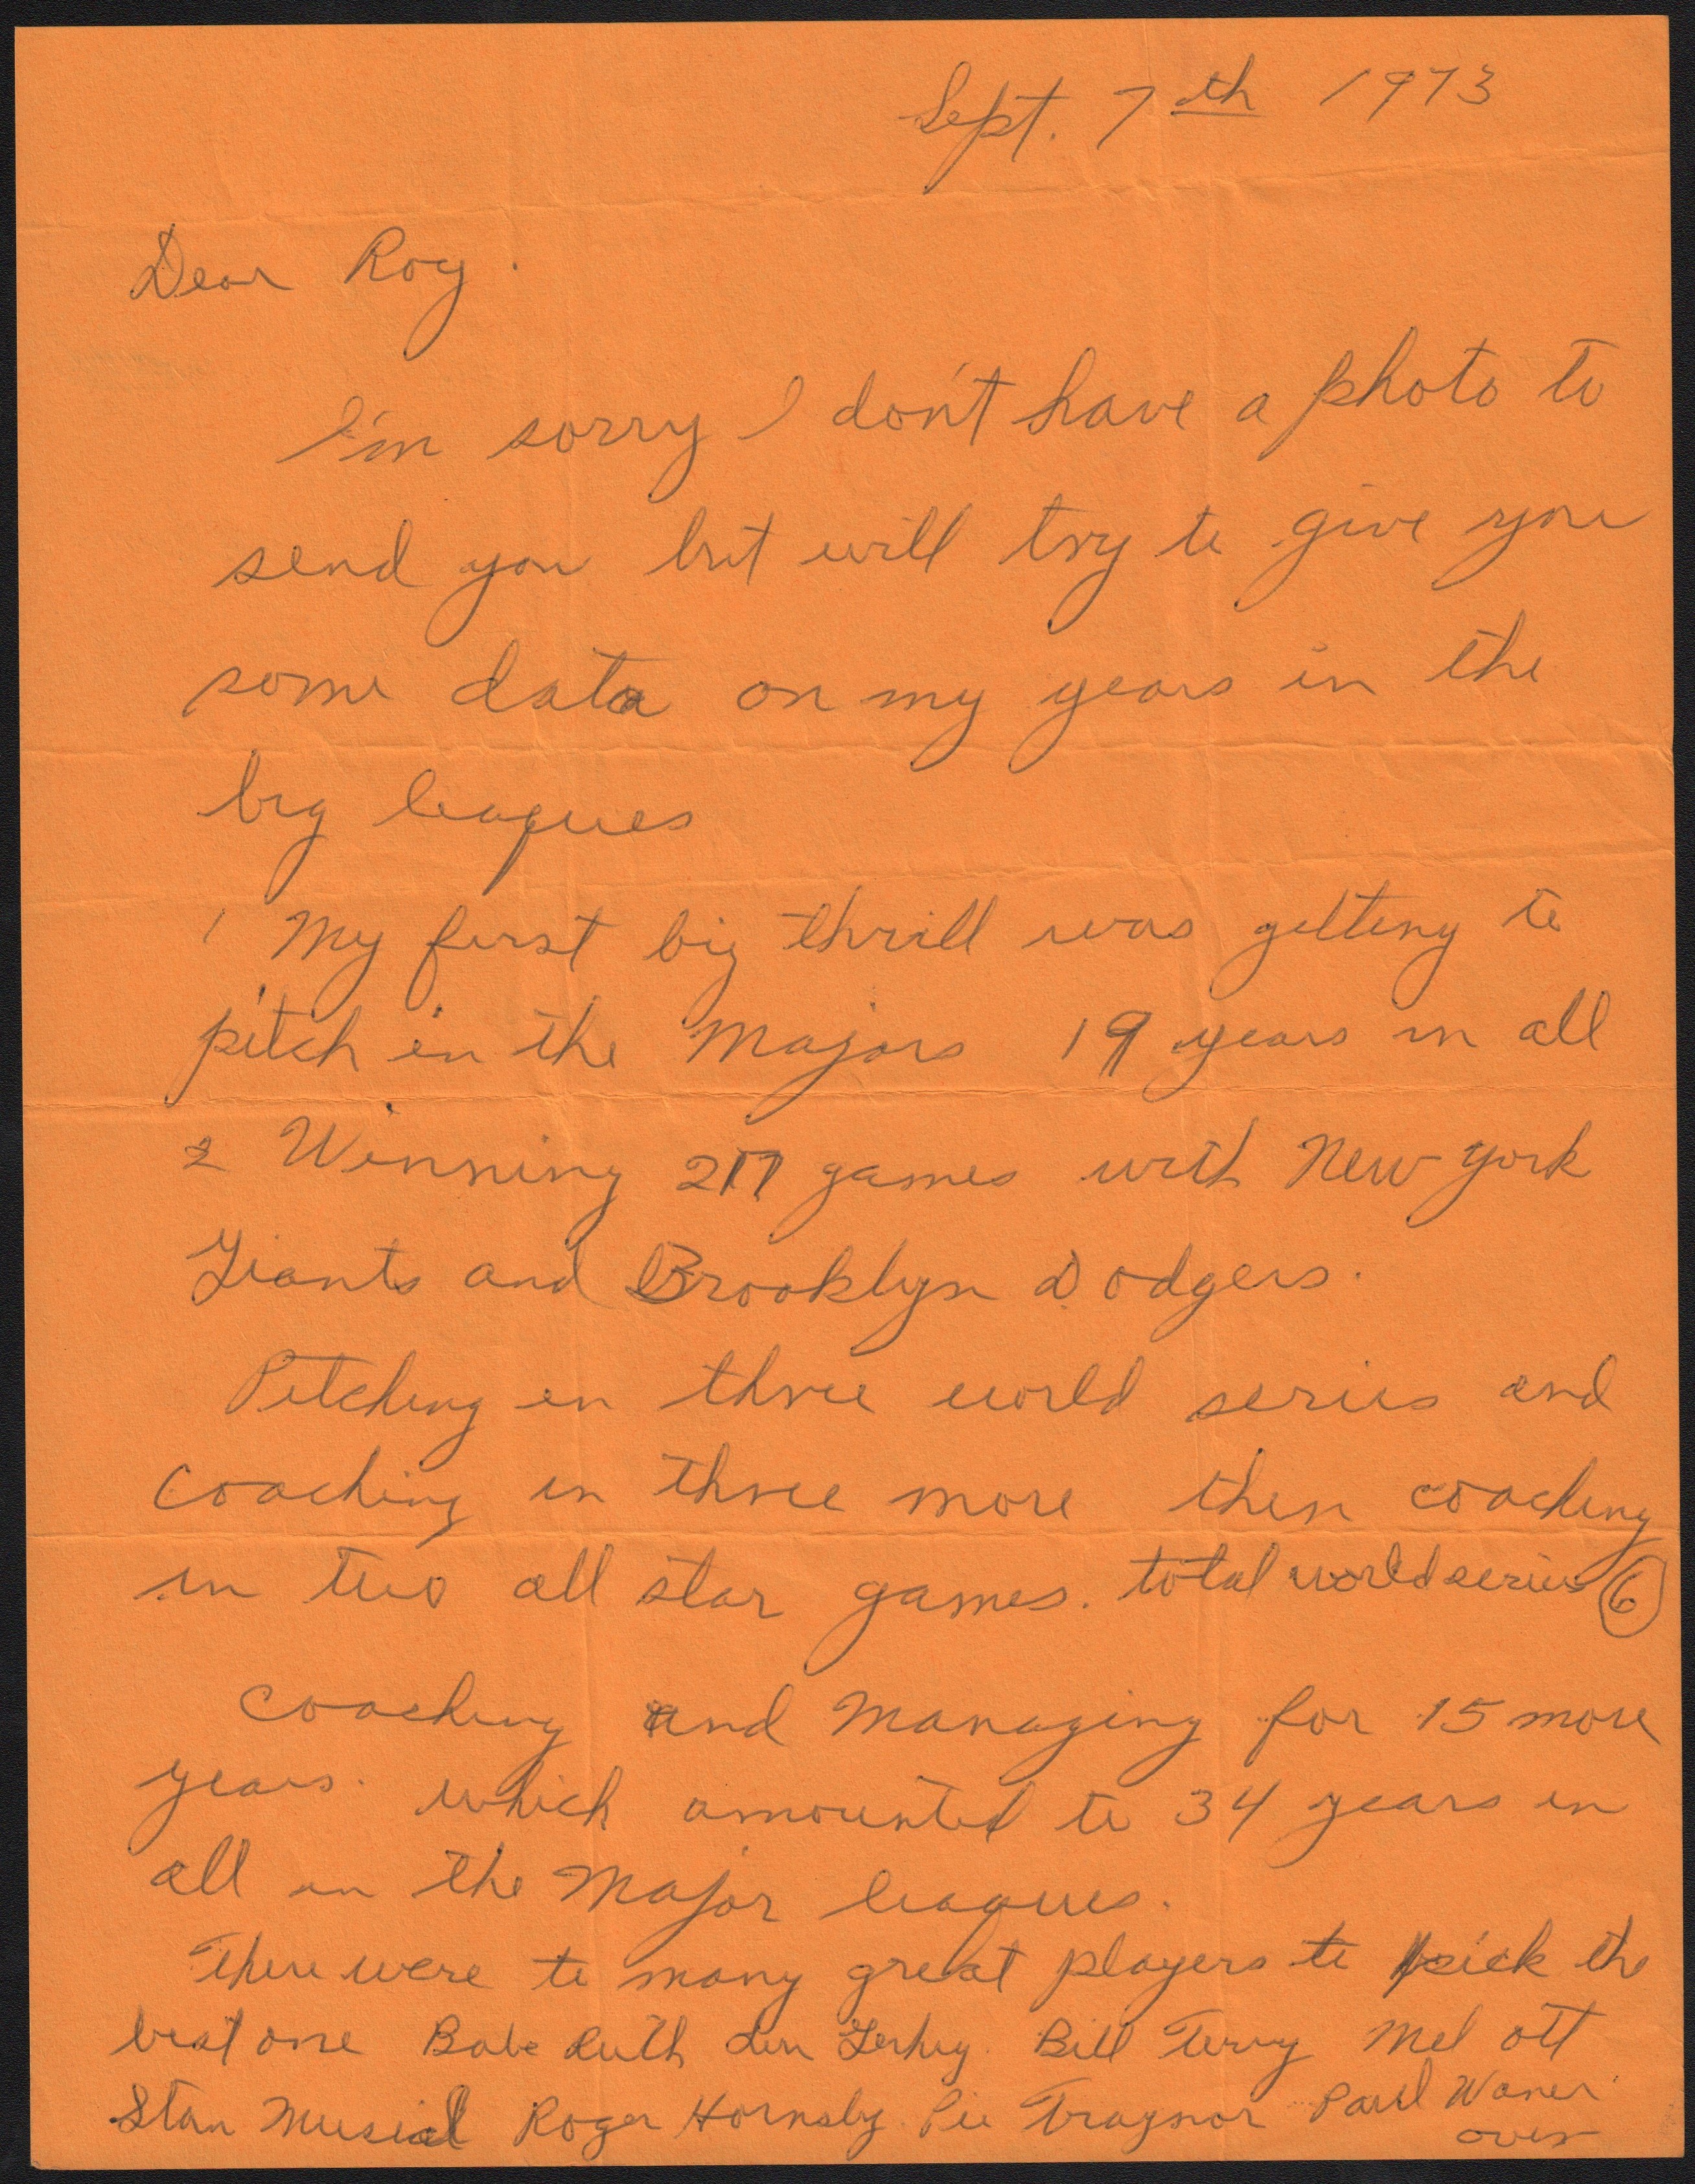 1973 Fred Fitzsimmons Handwritten Letter with Babe Ruth Content